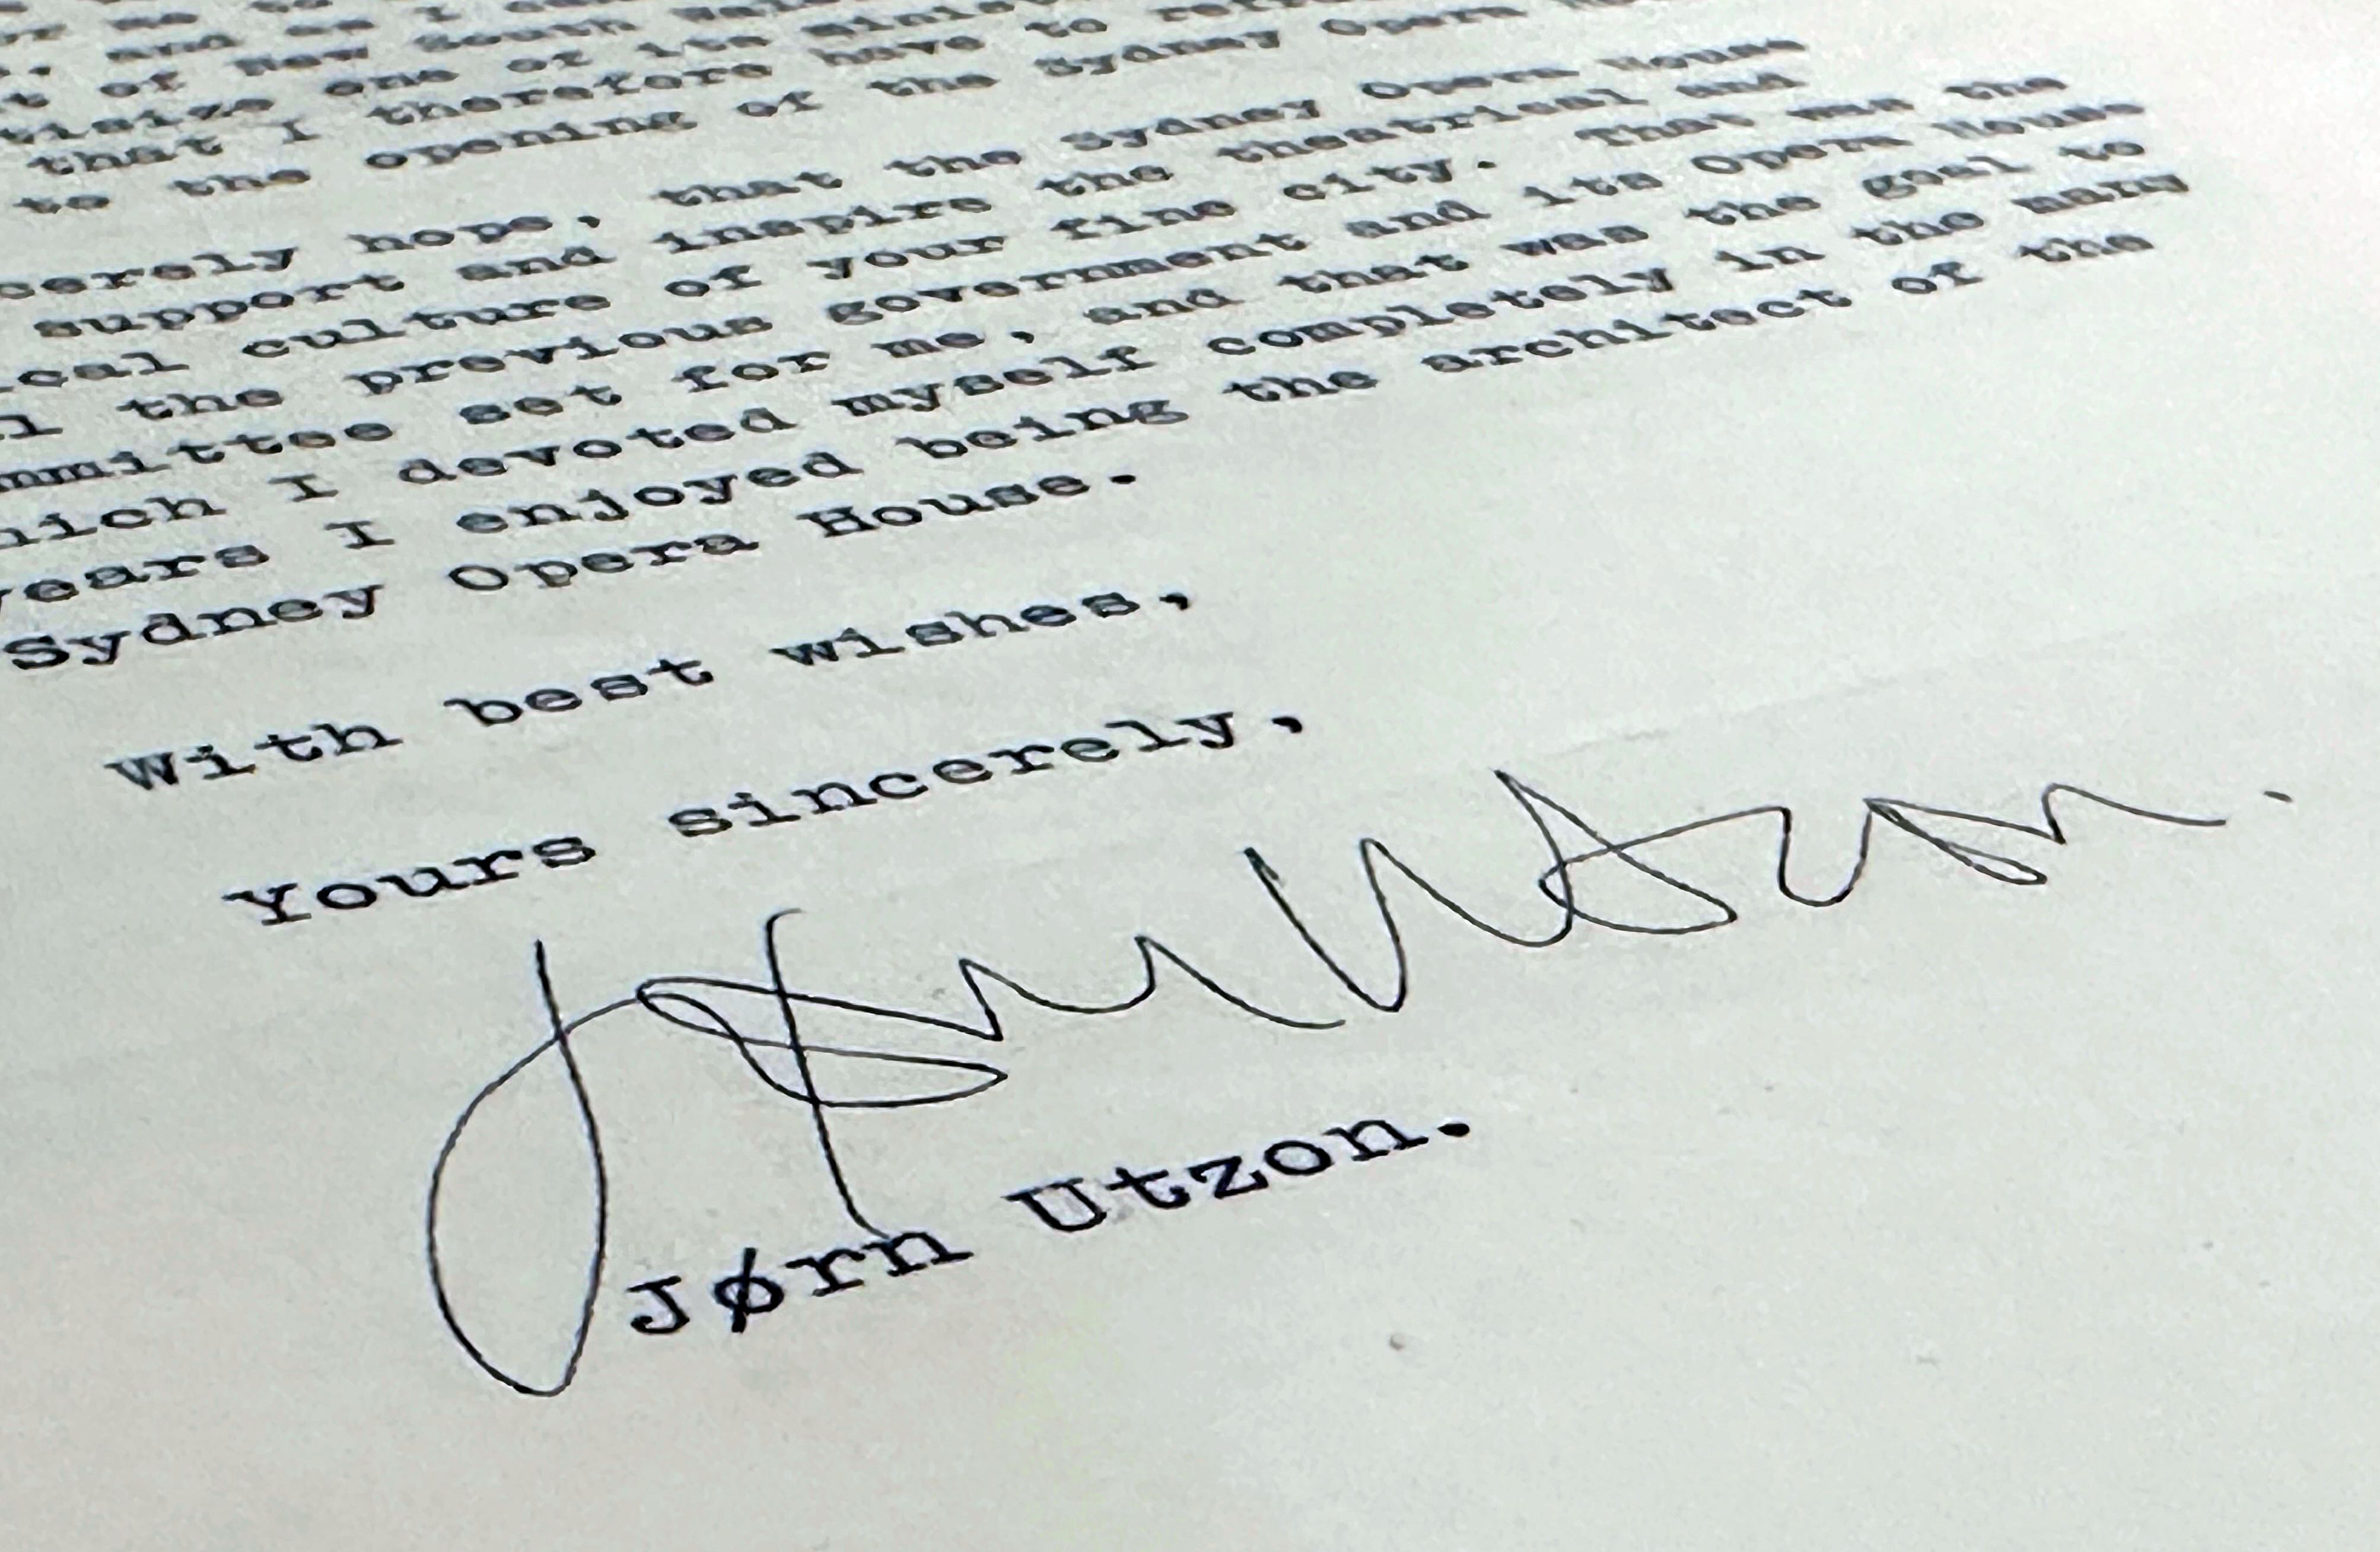 Utzon’s signature on his letter declining the invitation to attend the opening of the Sydney Opera House